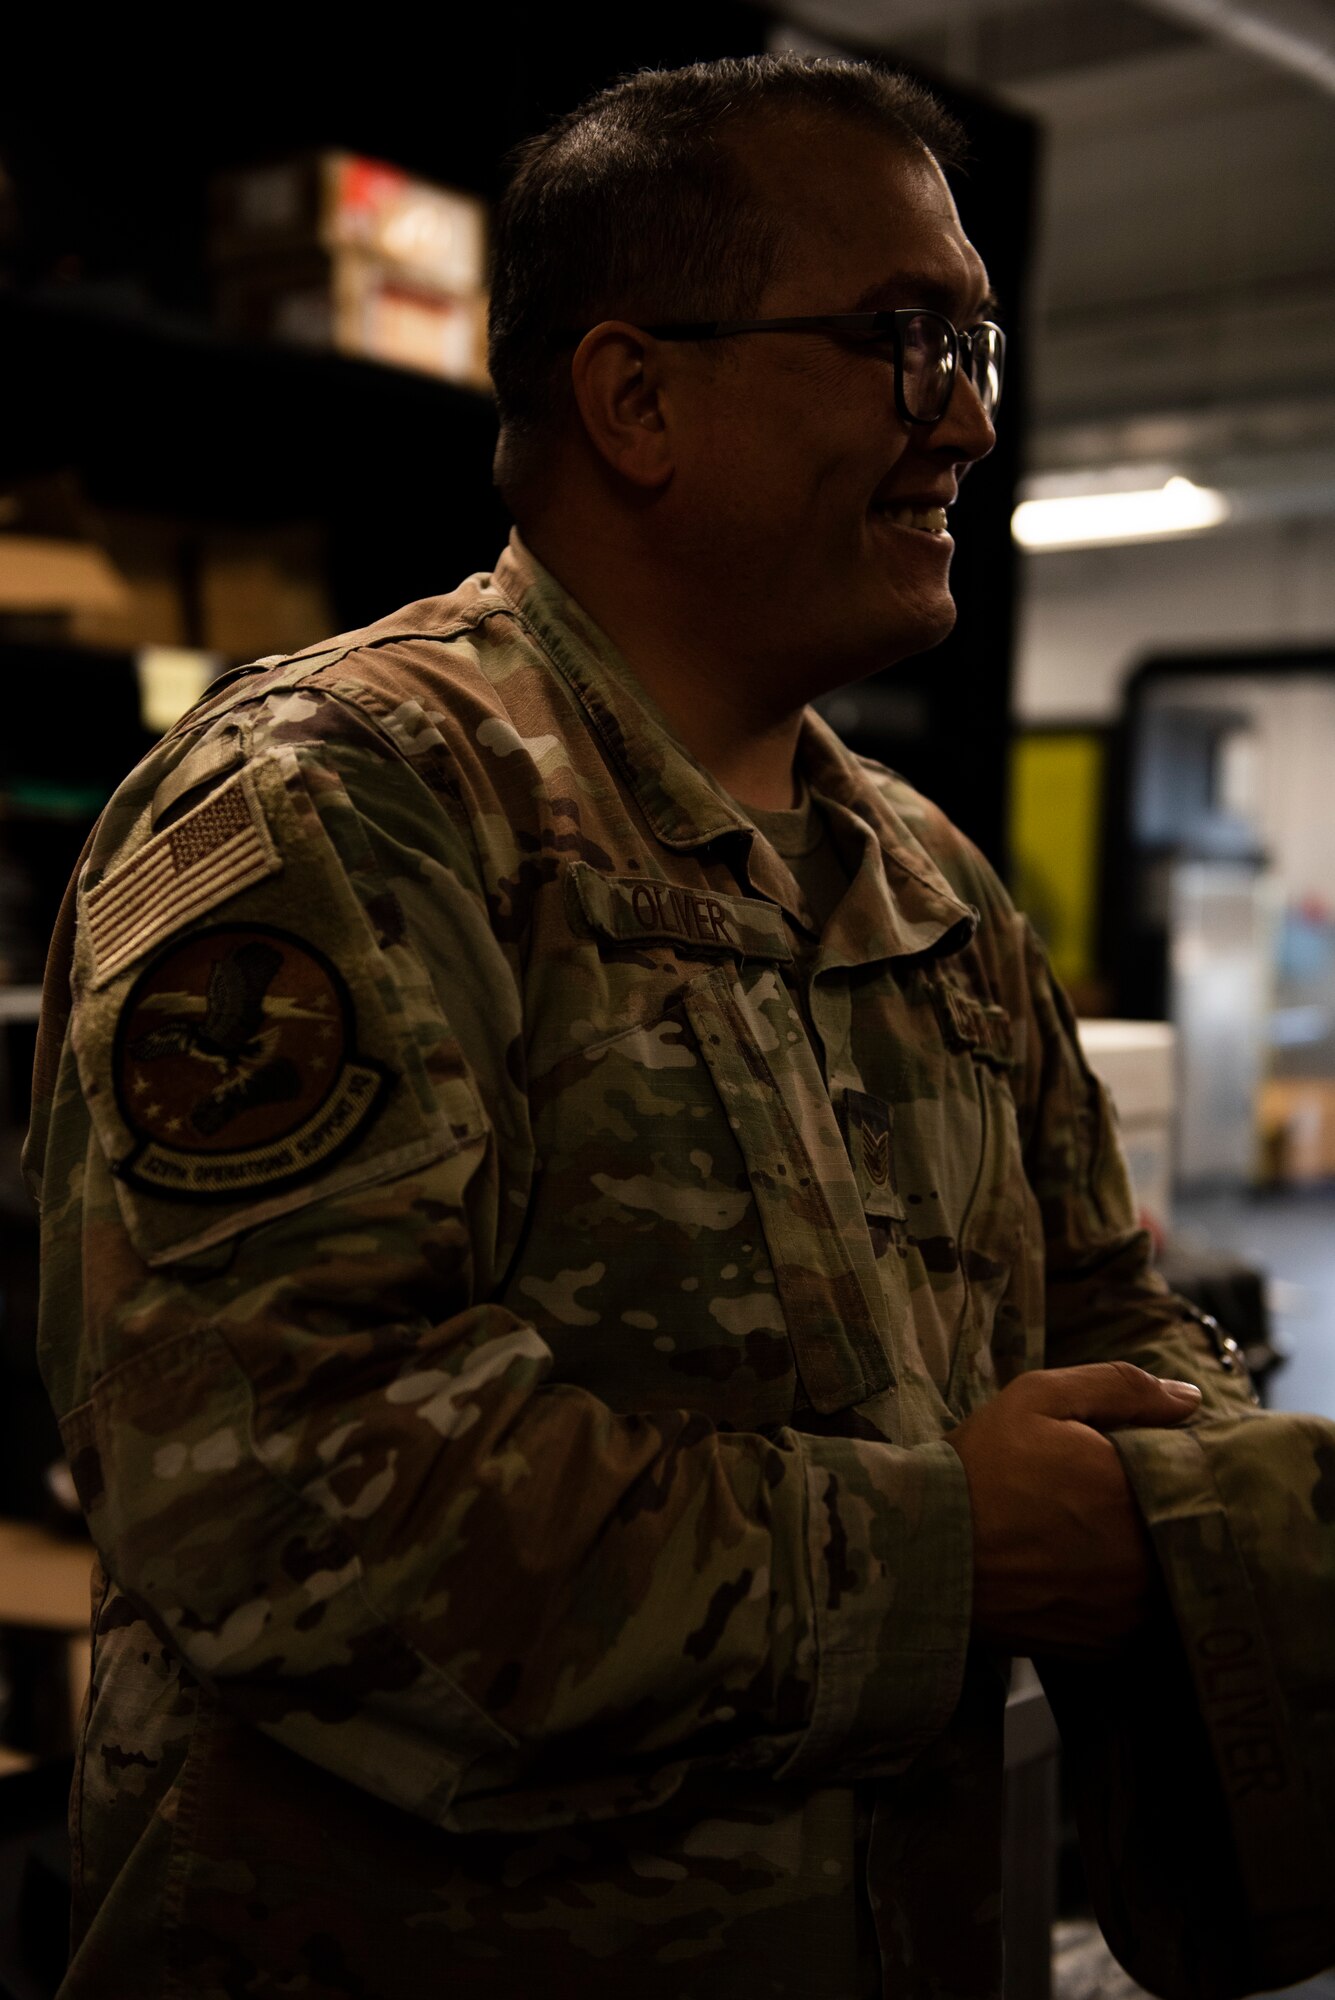 U.S. Air Force Tech. Sgt. Richard Oliver, 325th Operations Support Squadron Radar, Airfield, and Weather System noncommissioned in charge participates in a briefing at Tyndall Air Force Base, Florida, Nov. 26, 2019. Oliver and his team of Airmen maintain air traffic and control systems for Tyndall including all means of communication from air traffic controllers to aircraft operators via radio, as well as interagency communication via telephones. (U.S. Air Force photo by Staff Sgt. Magen M. Reeves)